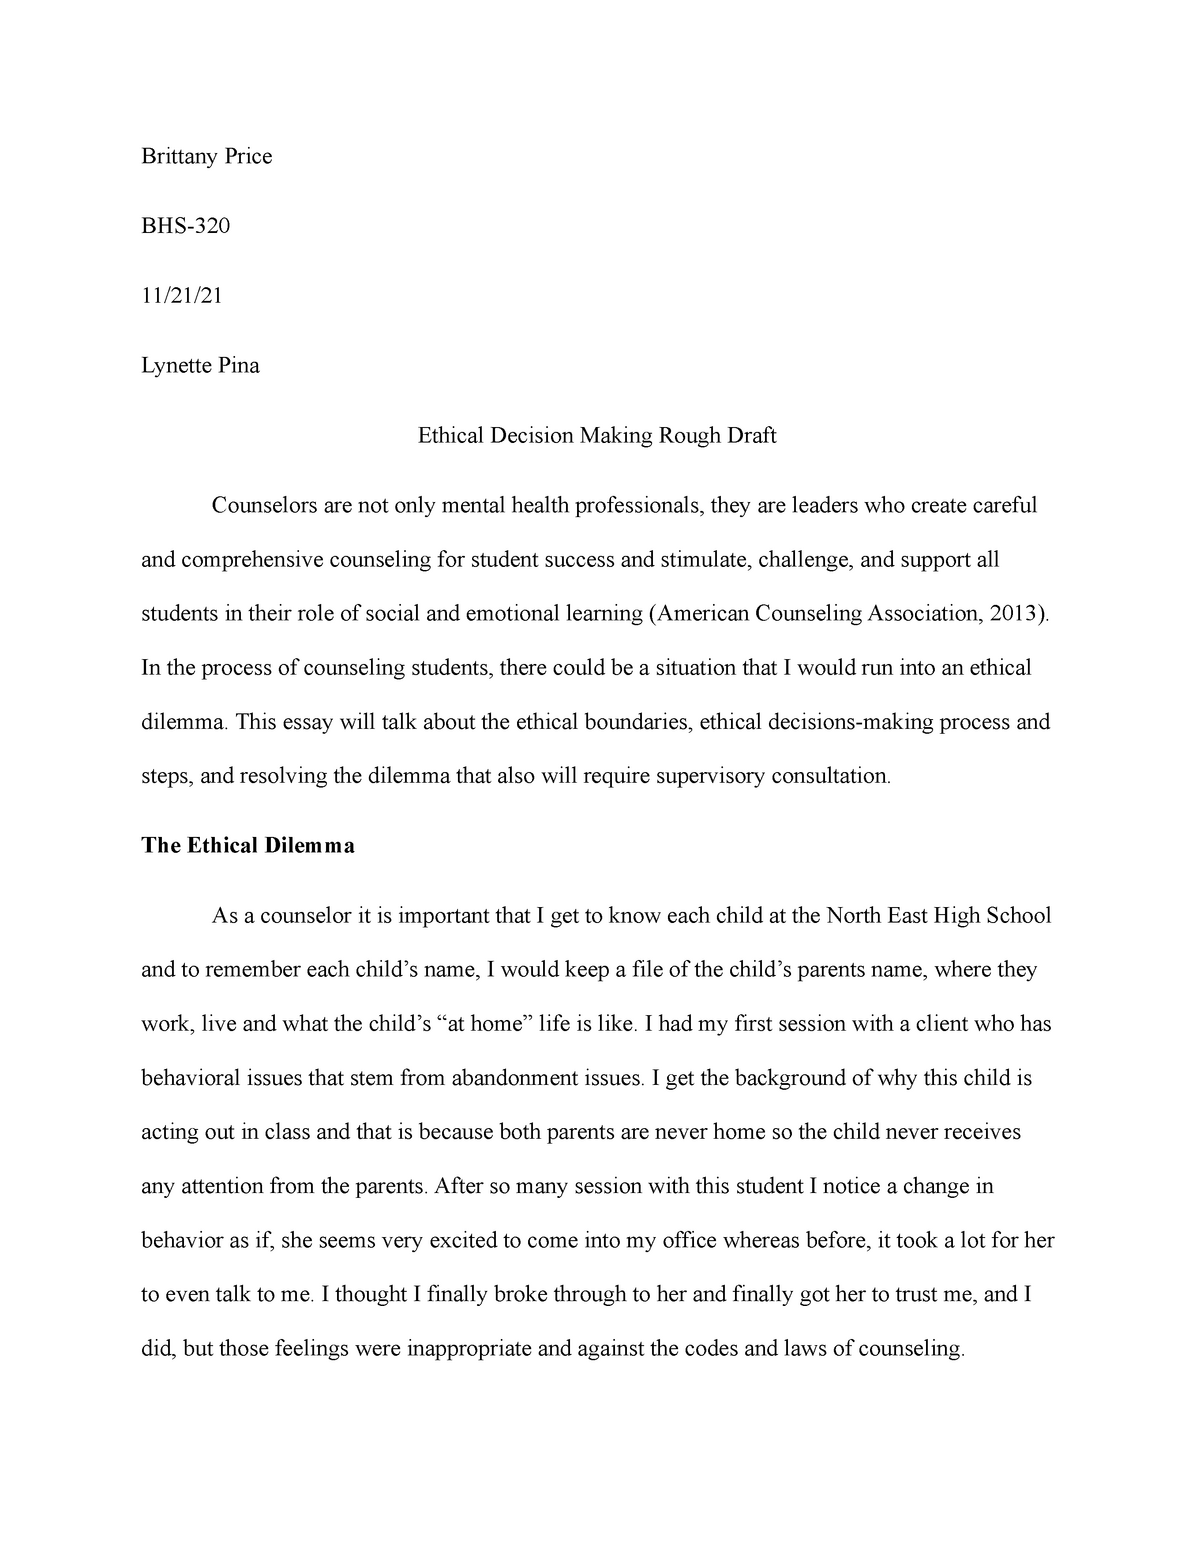 ethical decision making essay